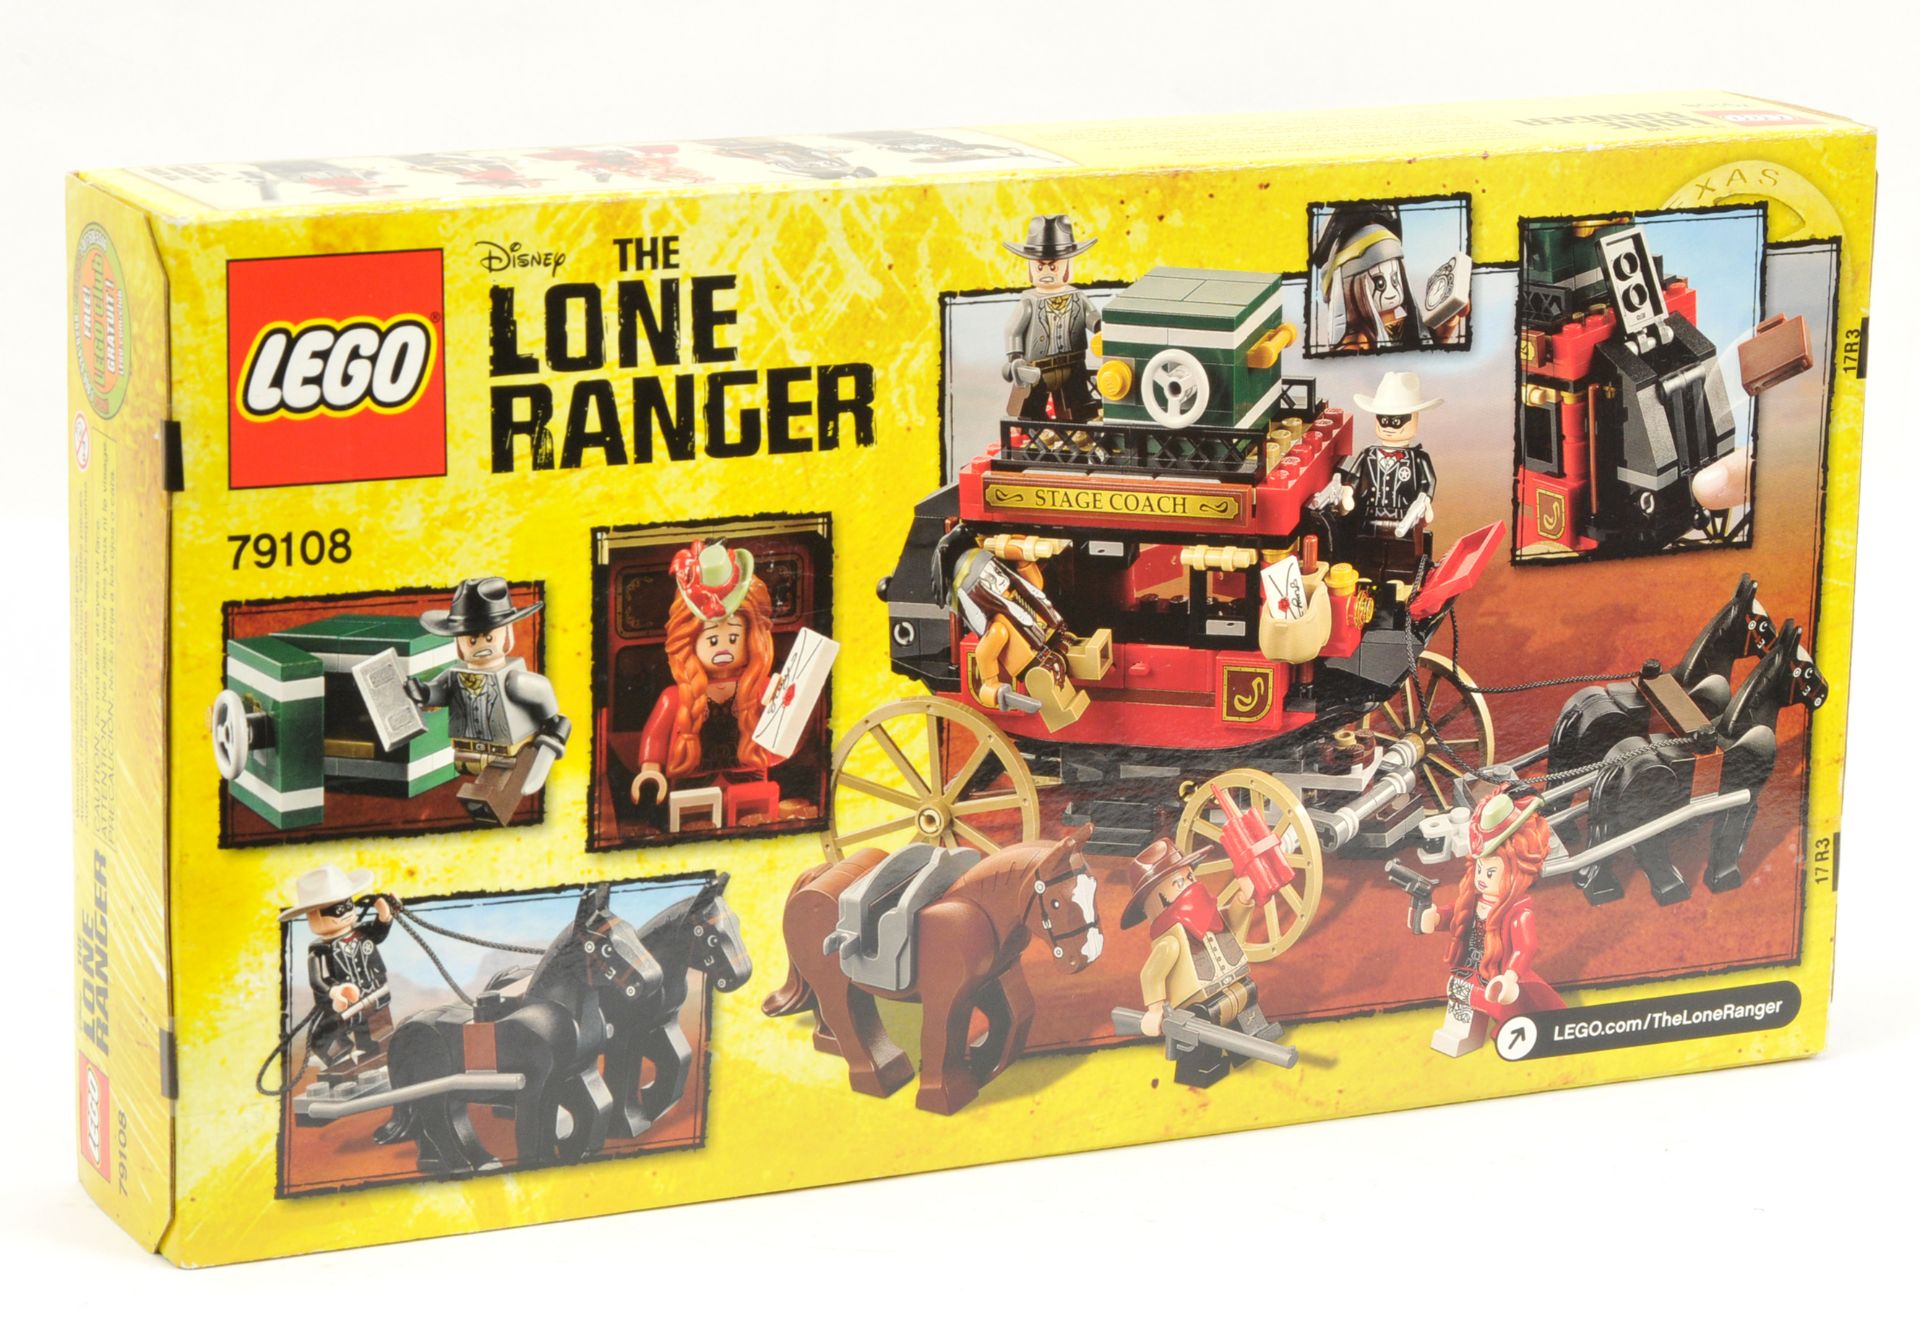 Lego The Lone Ranger Stagecoach Escape set number 79108 - Image 2 of 2